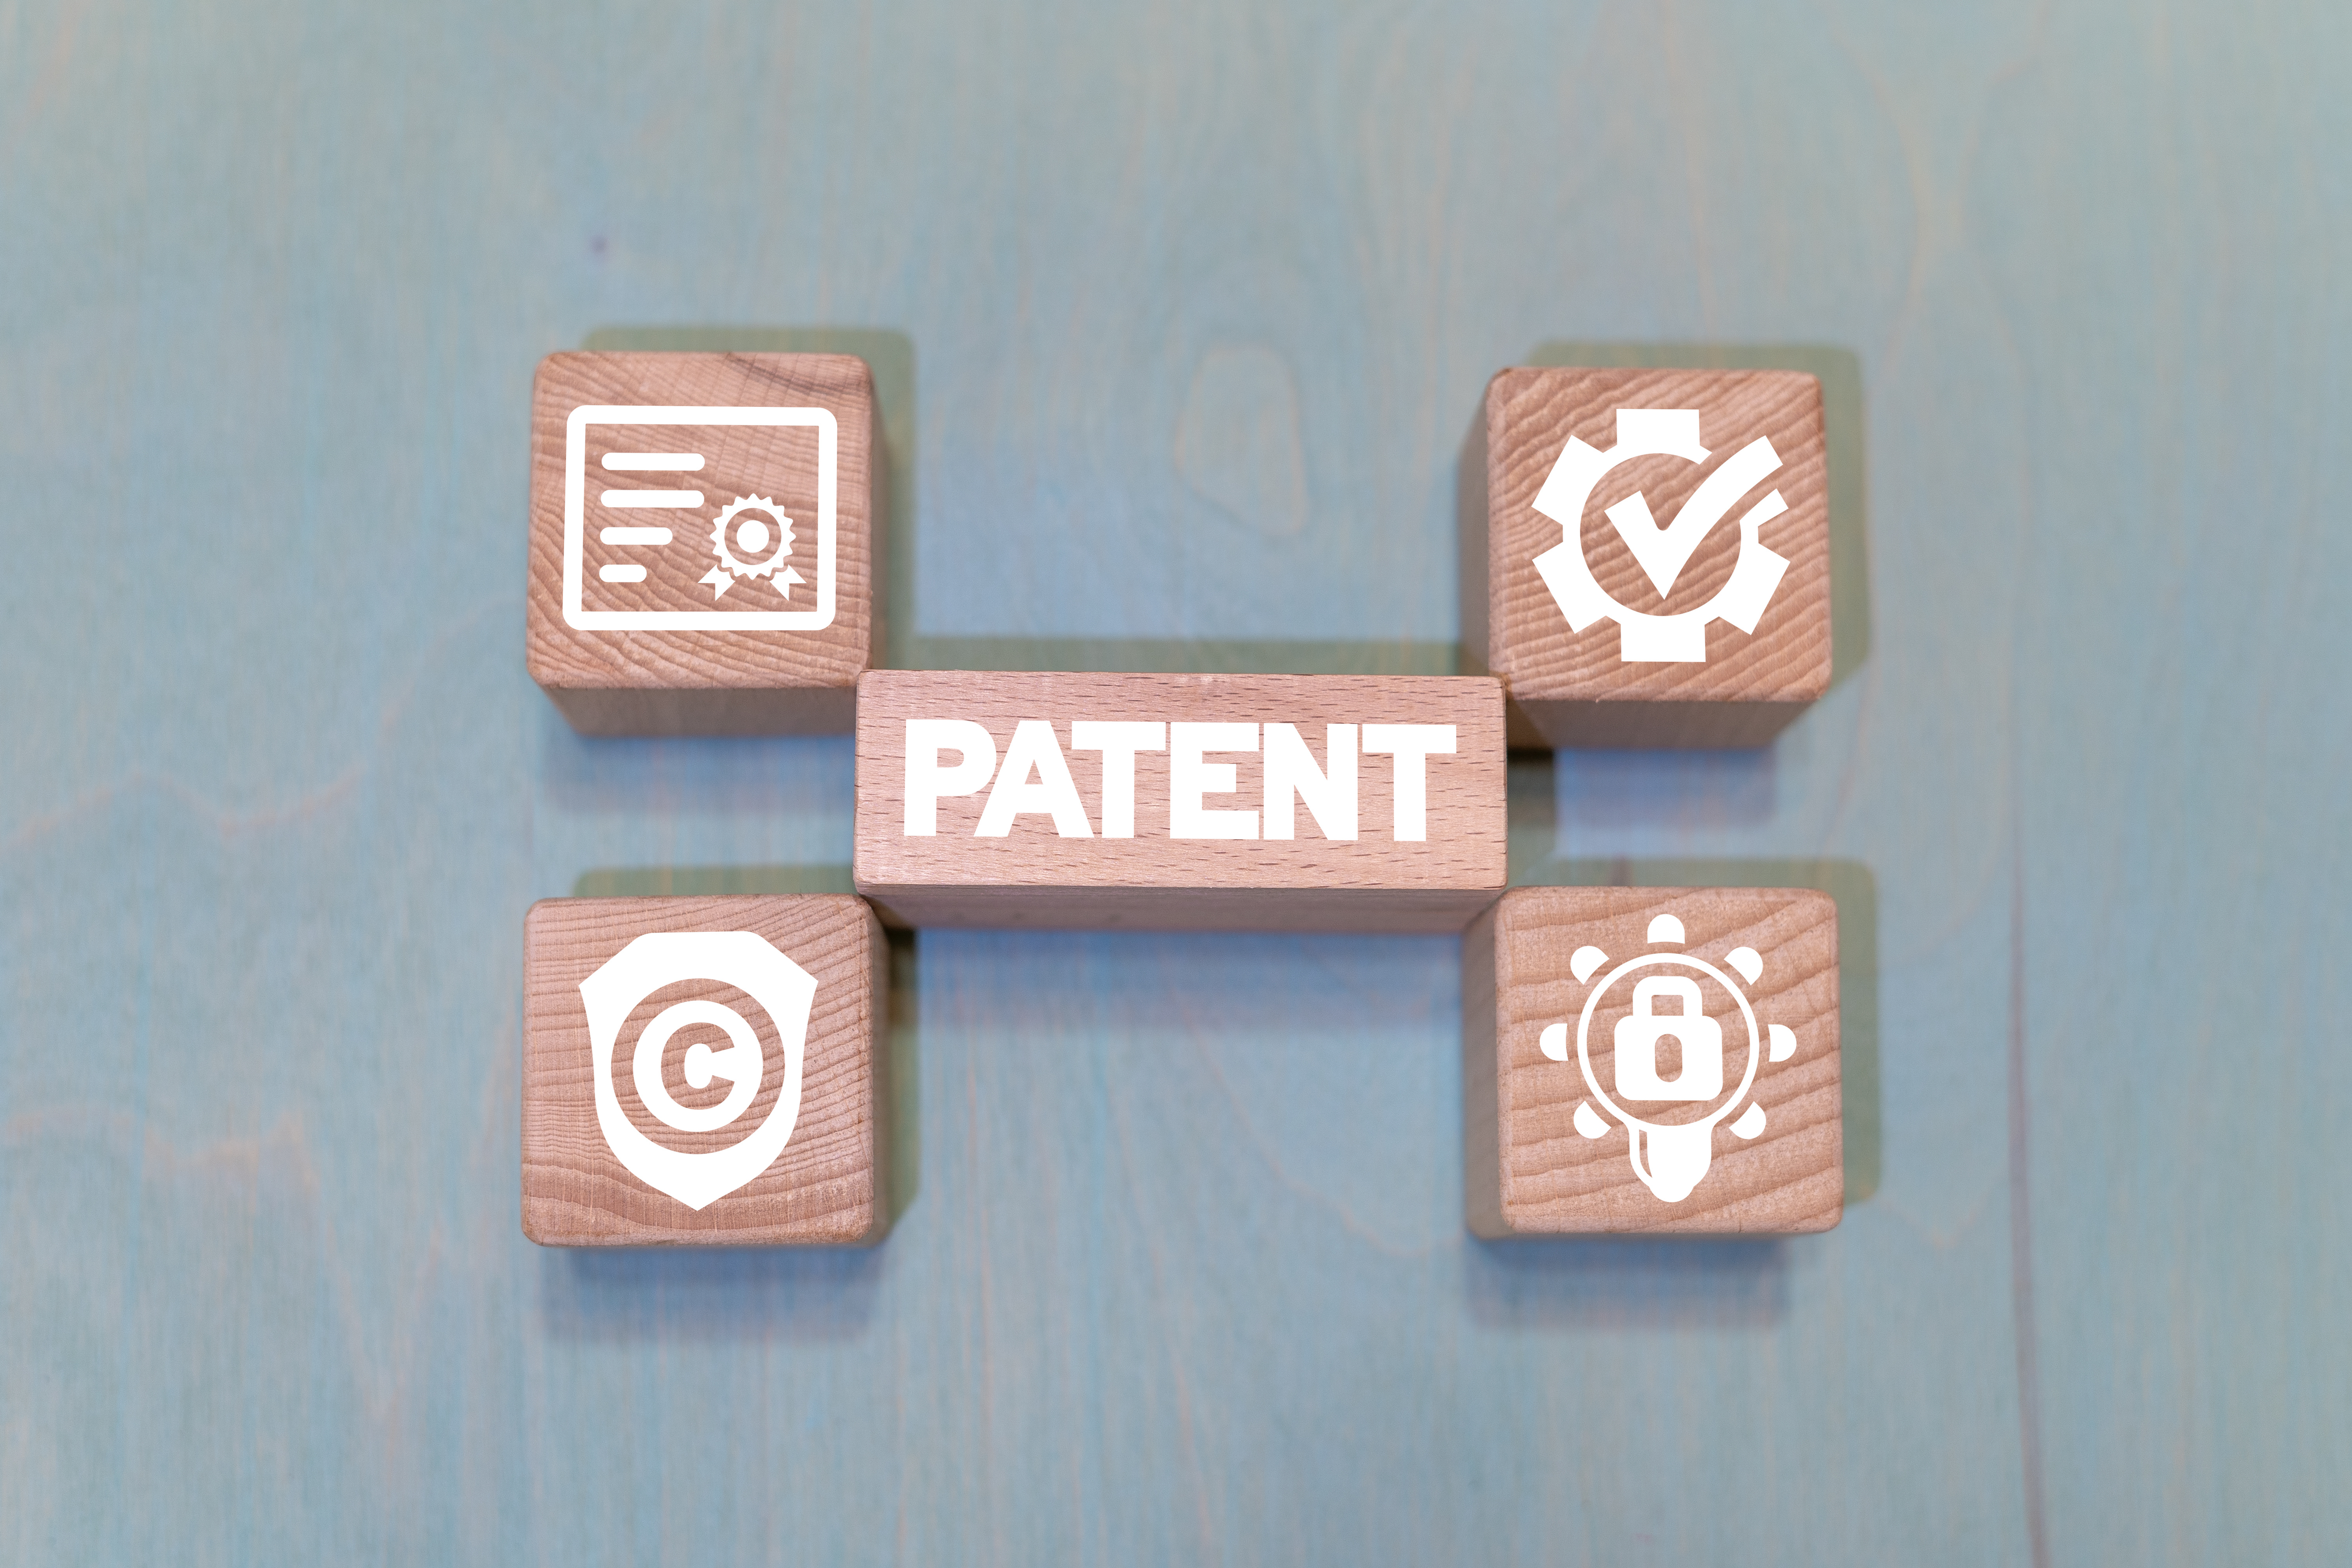 Upcoming Changes to UK Patents Rules